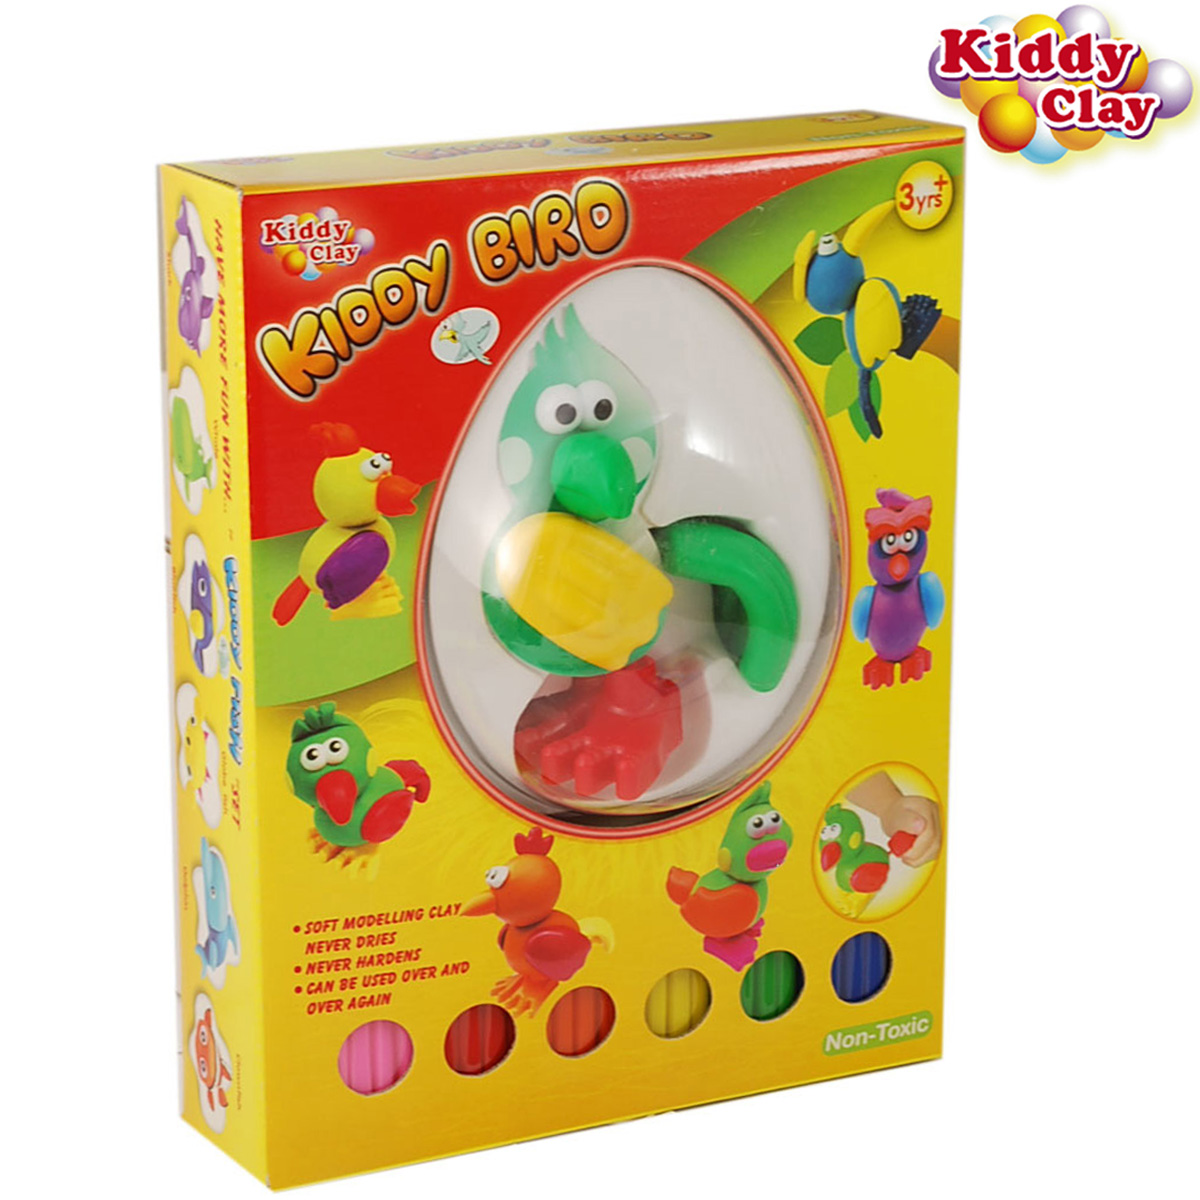 Kiddy Clay : 6 Colors of Clay+Bird Parts /Parrot